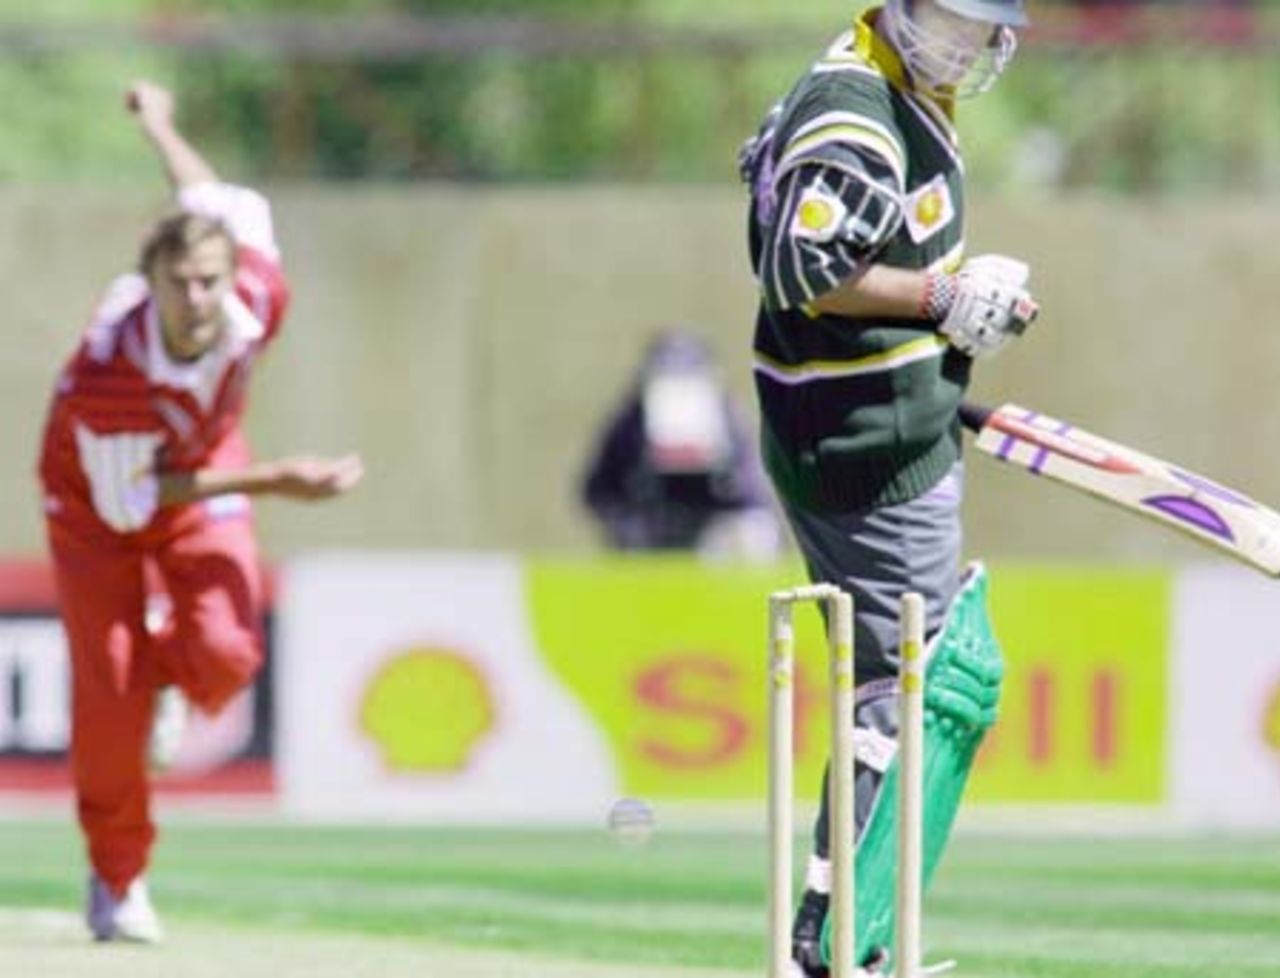 Central Districts batsman Craig Spearman plays on to his off stump to be dismissed off the bowling of Chris Martin for 0. 2nd Shell Cup Final: Canterbury v Central Districts at Jade Stadium, Christchurch, 27 January 2001.